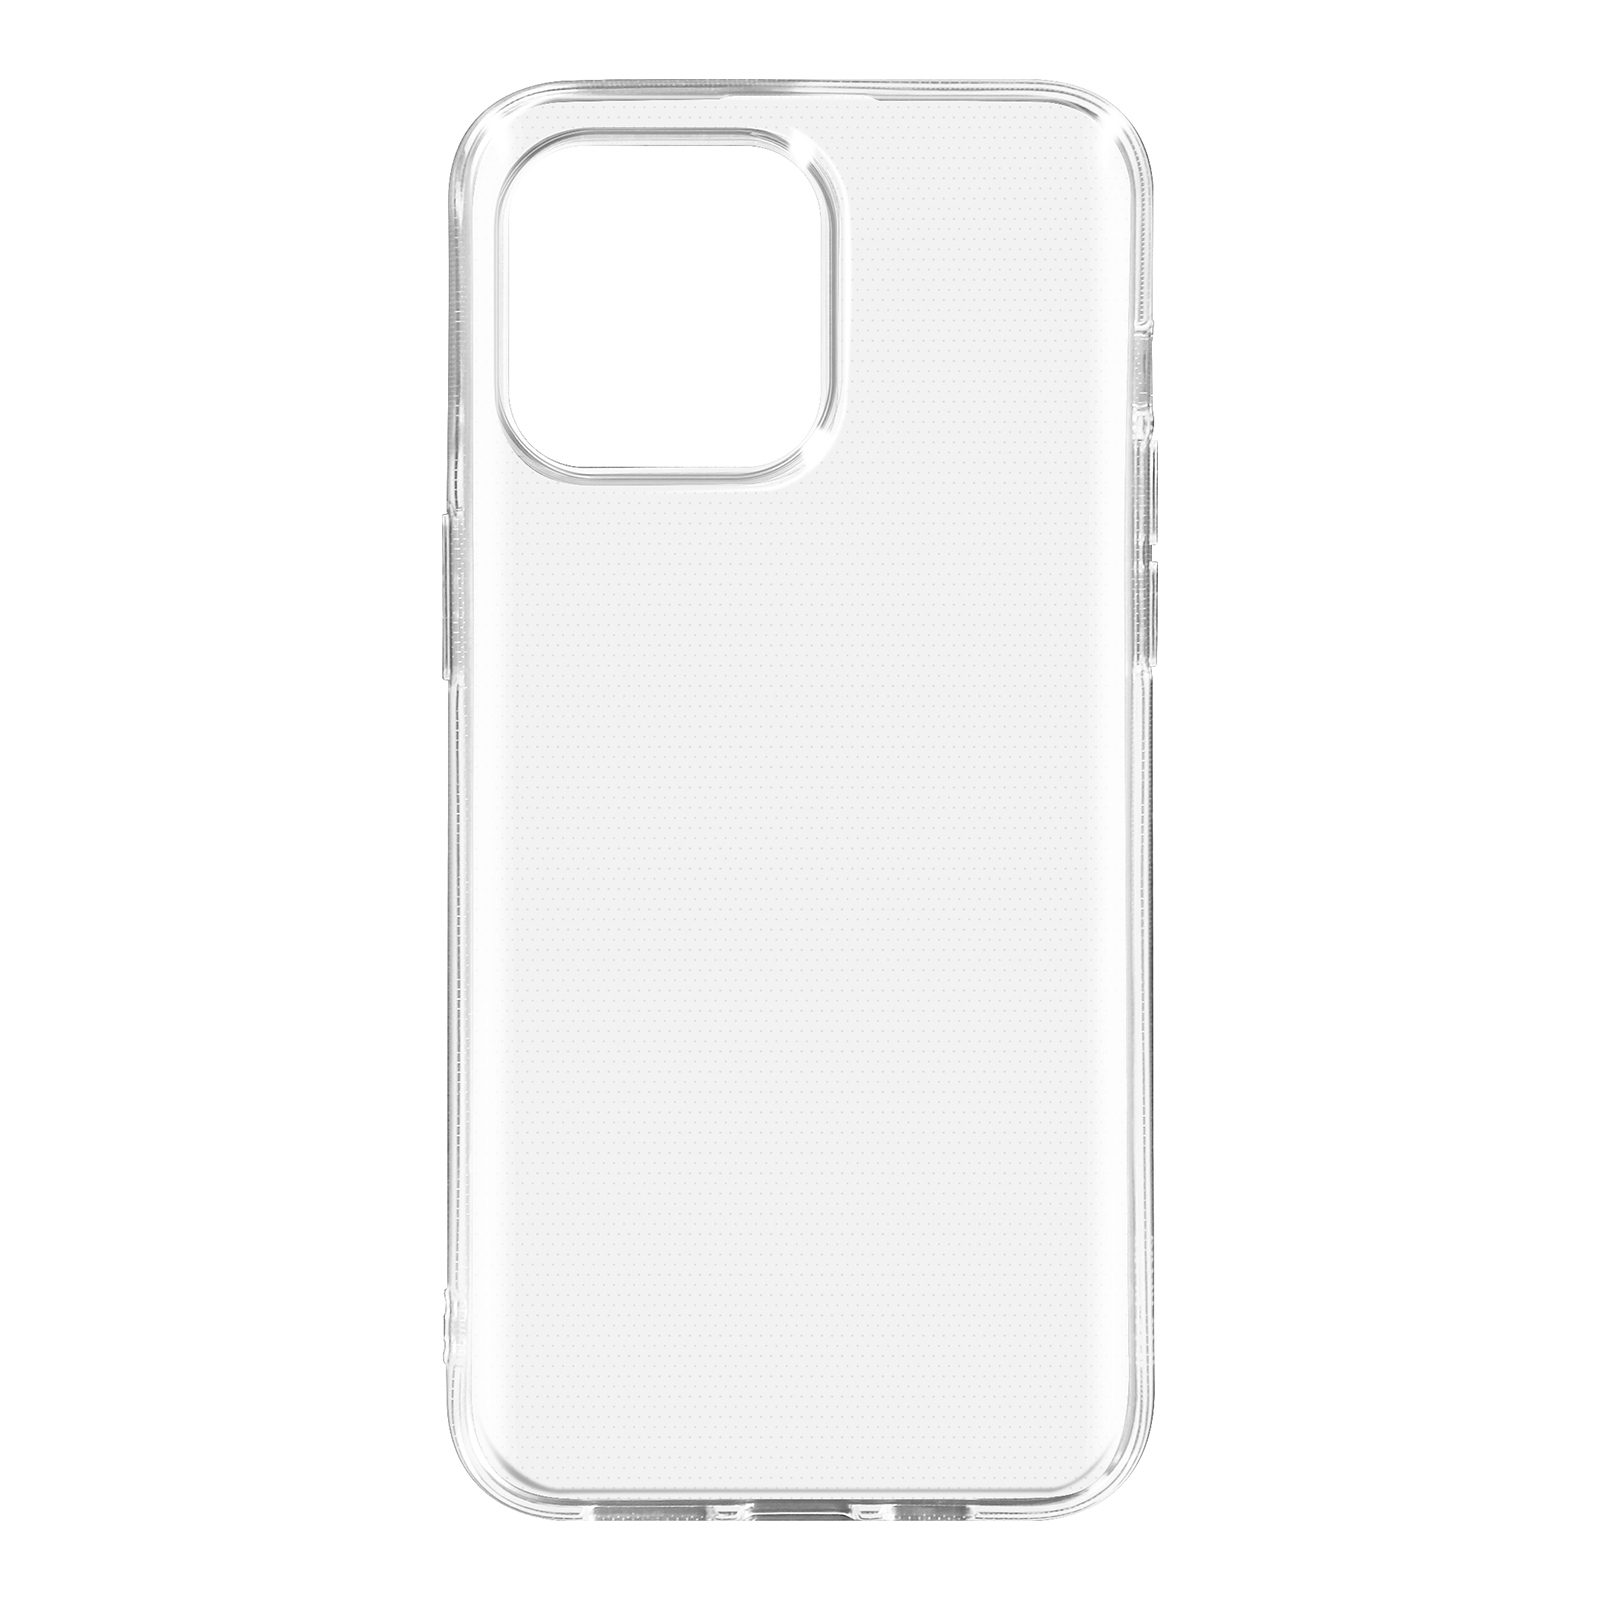 iPhone Max, 15 Series, AVIZAR Backcover, Transparent Case Pro Classic Apple,